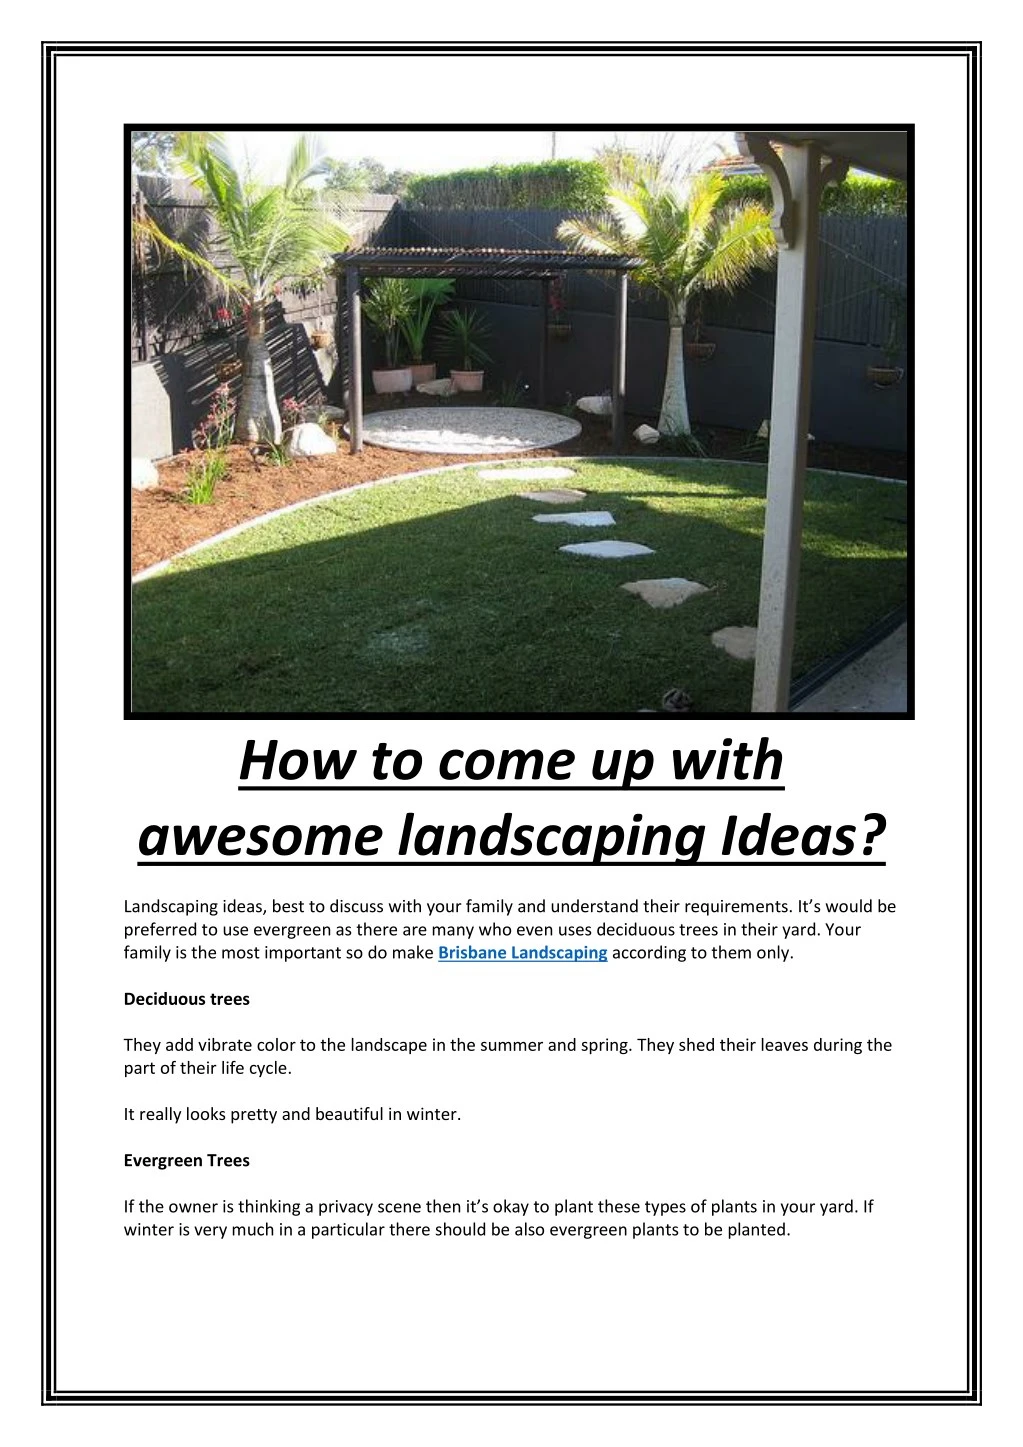 how to come up with awesome landscaping ideas